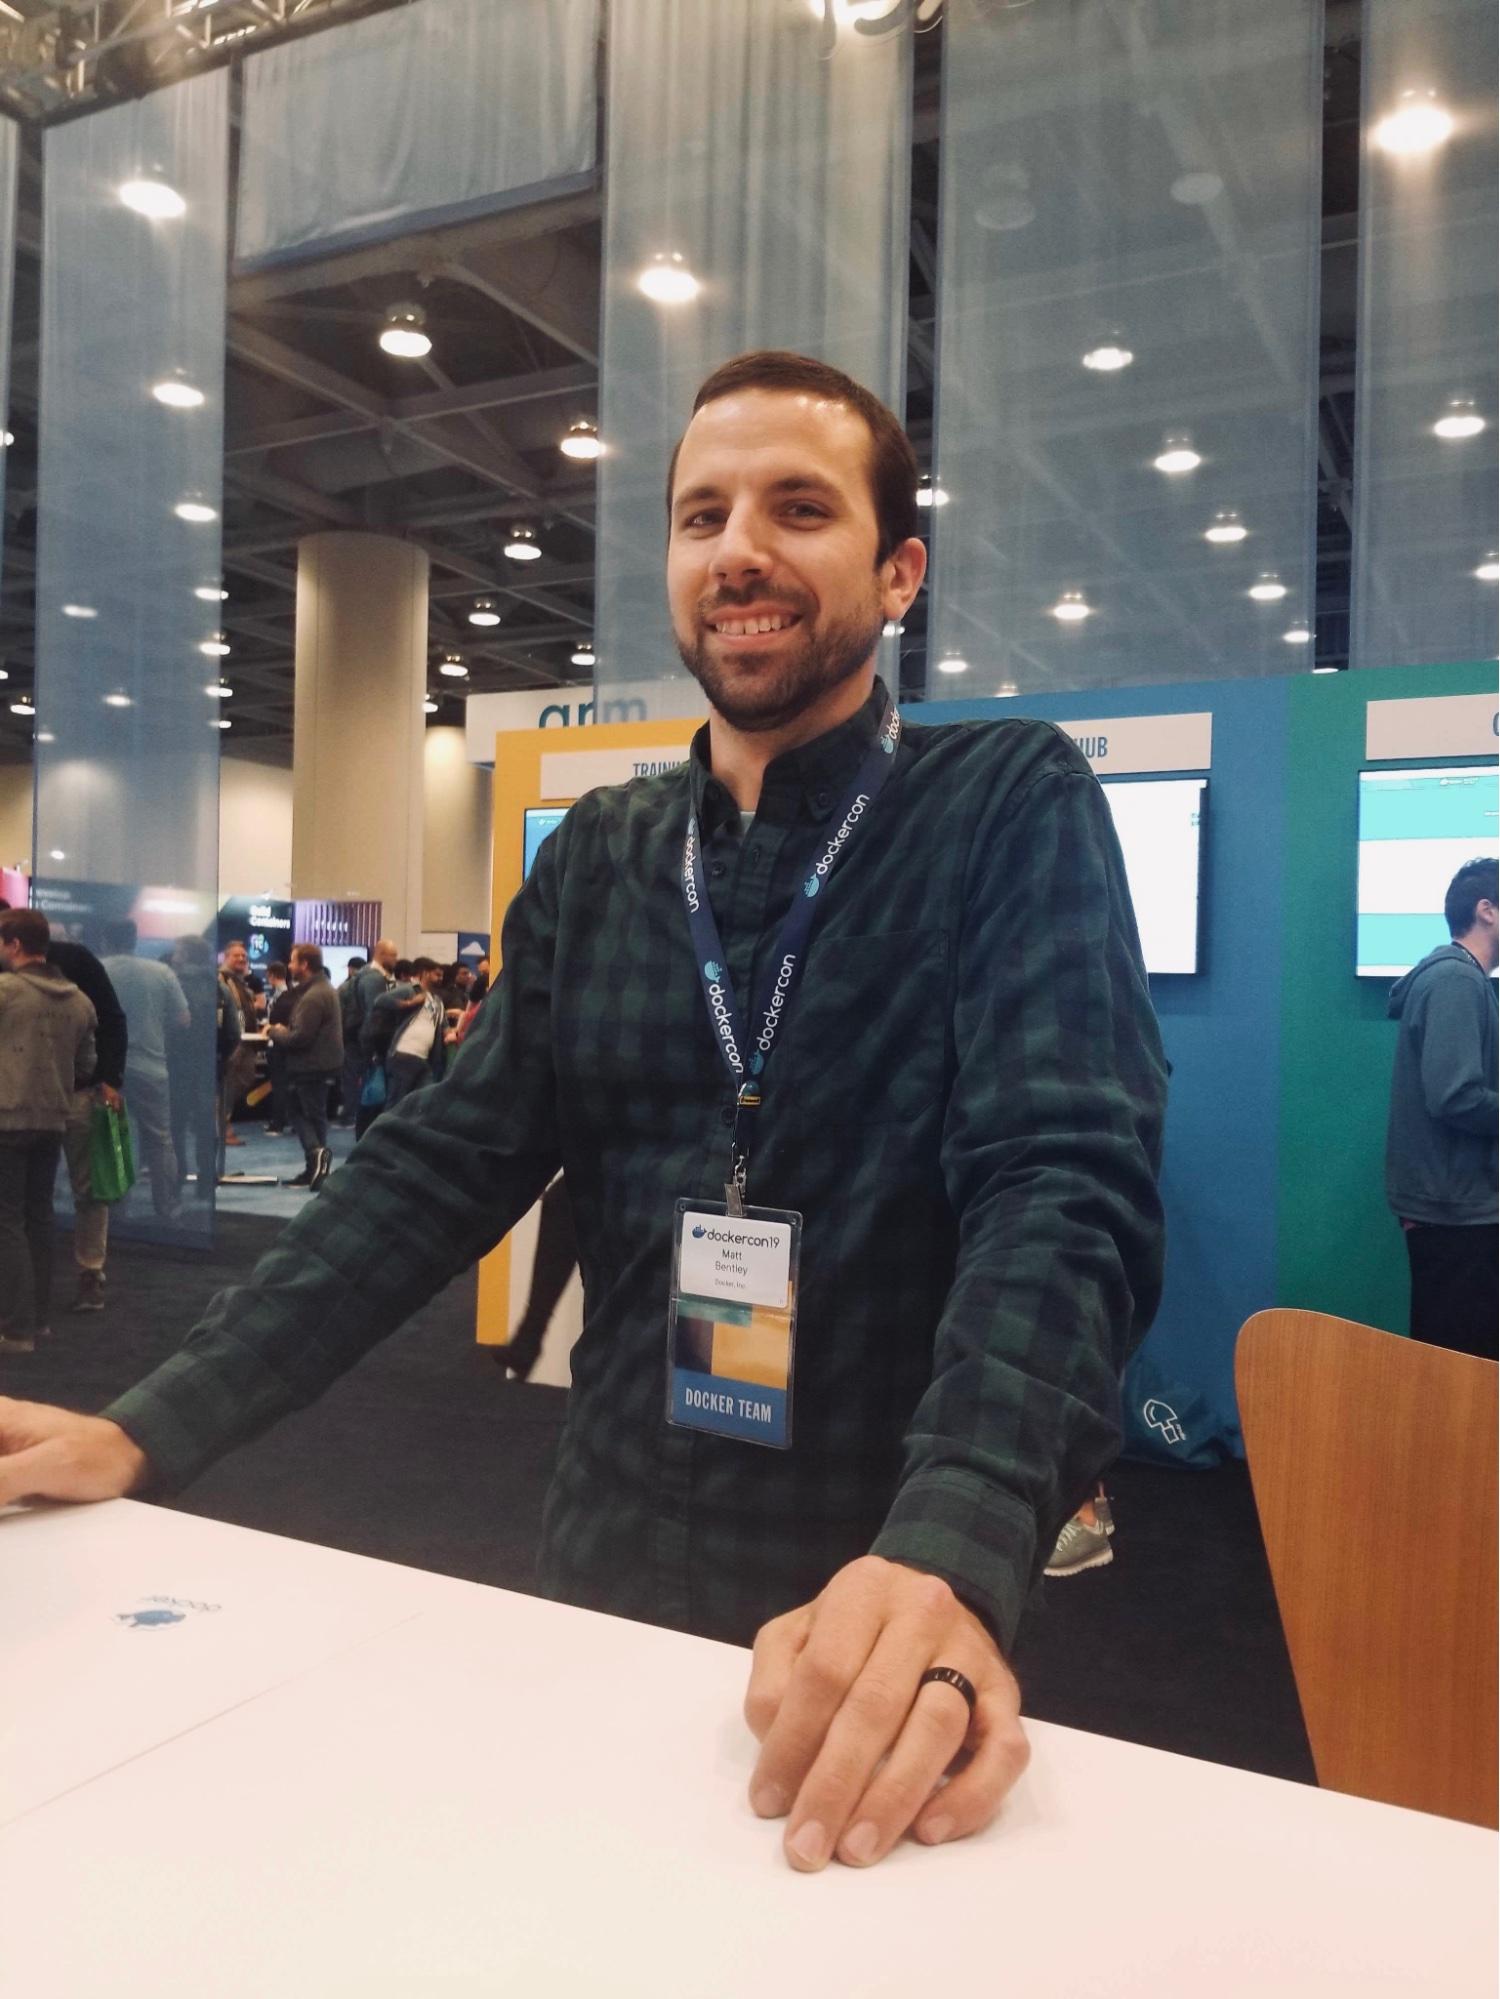 Matt Betley standing behind a booth counter at DockerCon 2019 with hands on counter wearing "Docker Team" badge